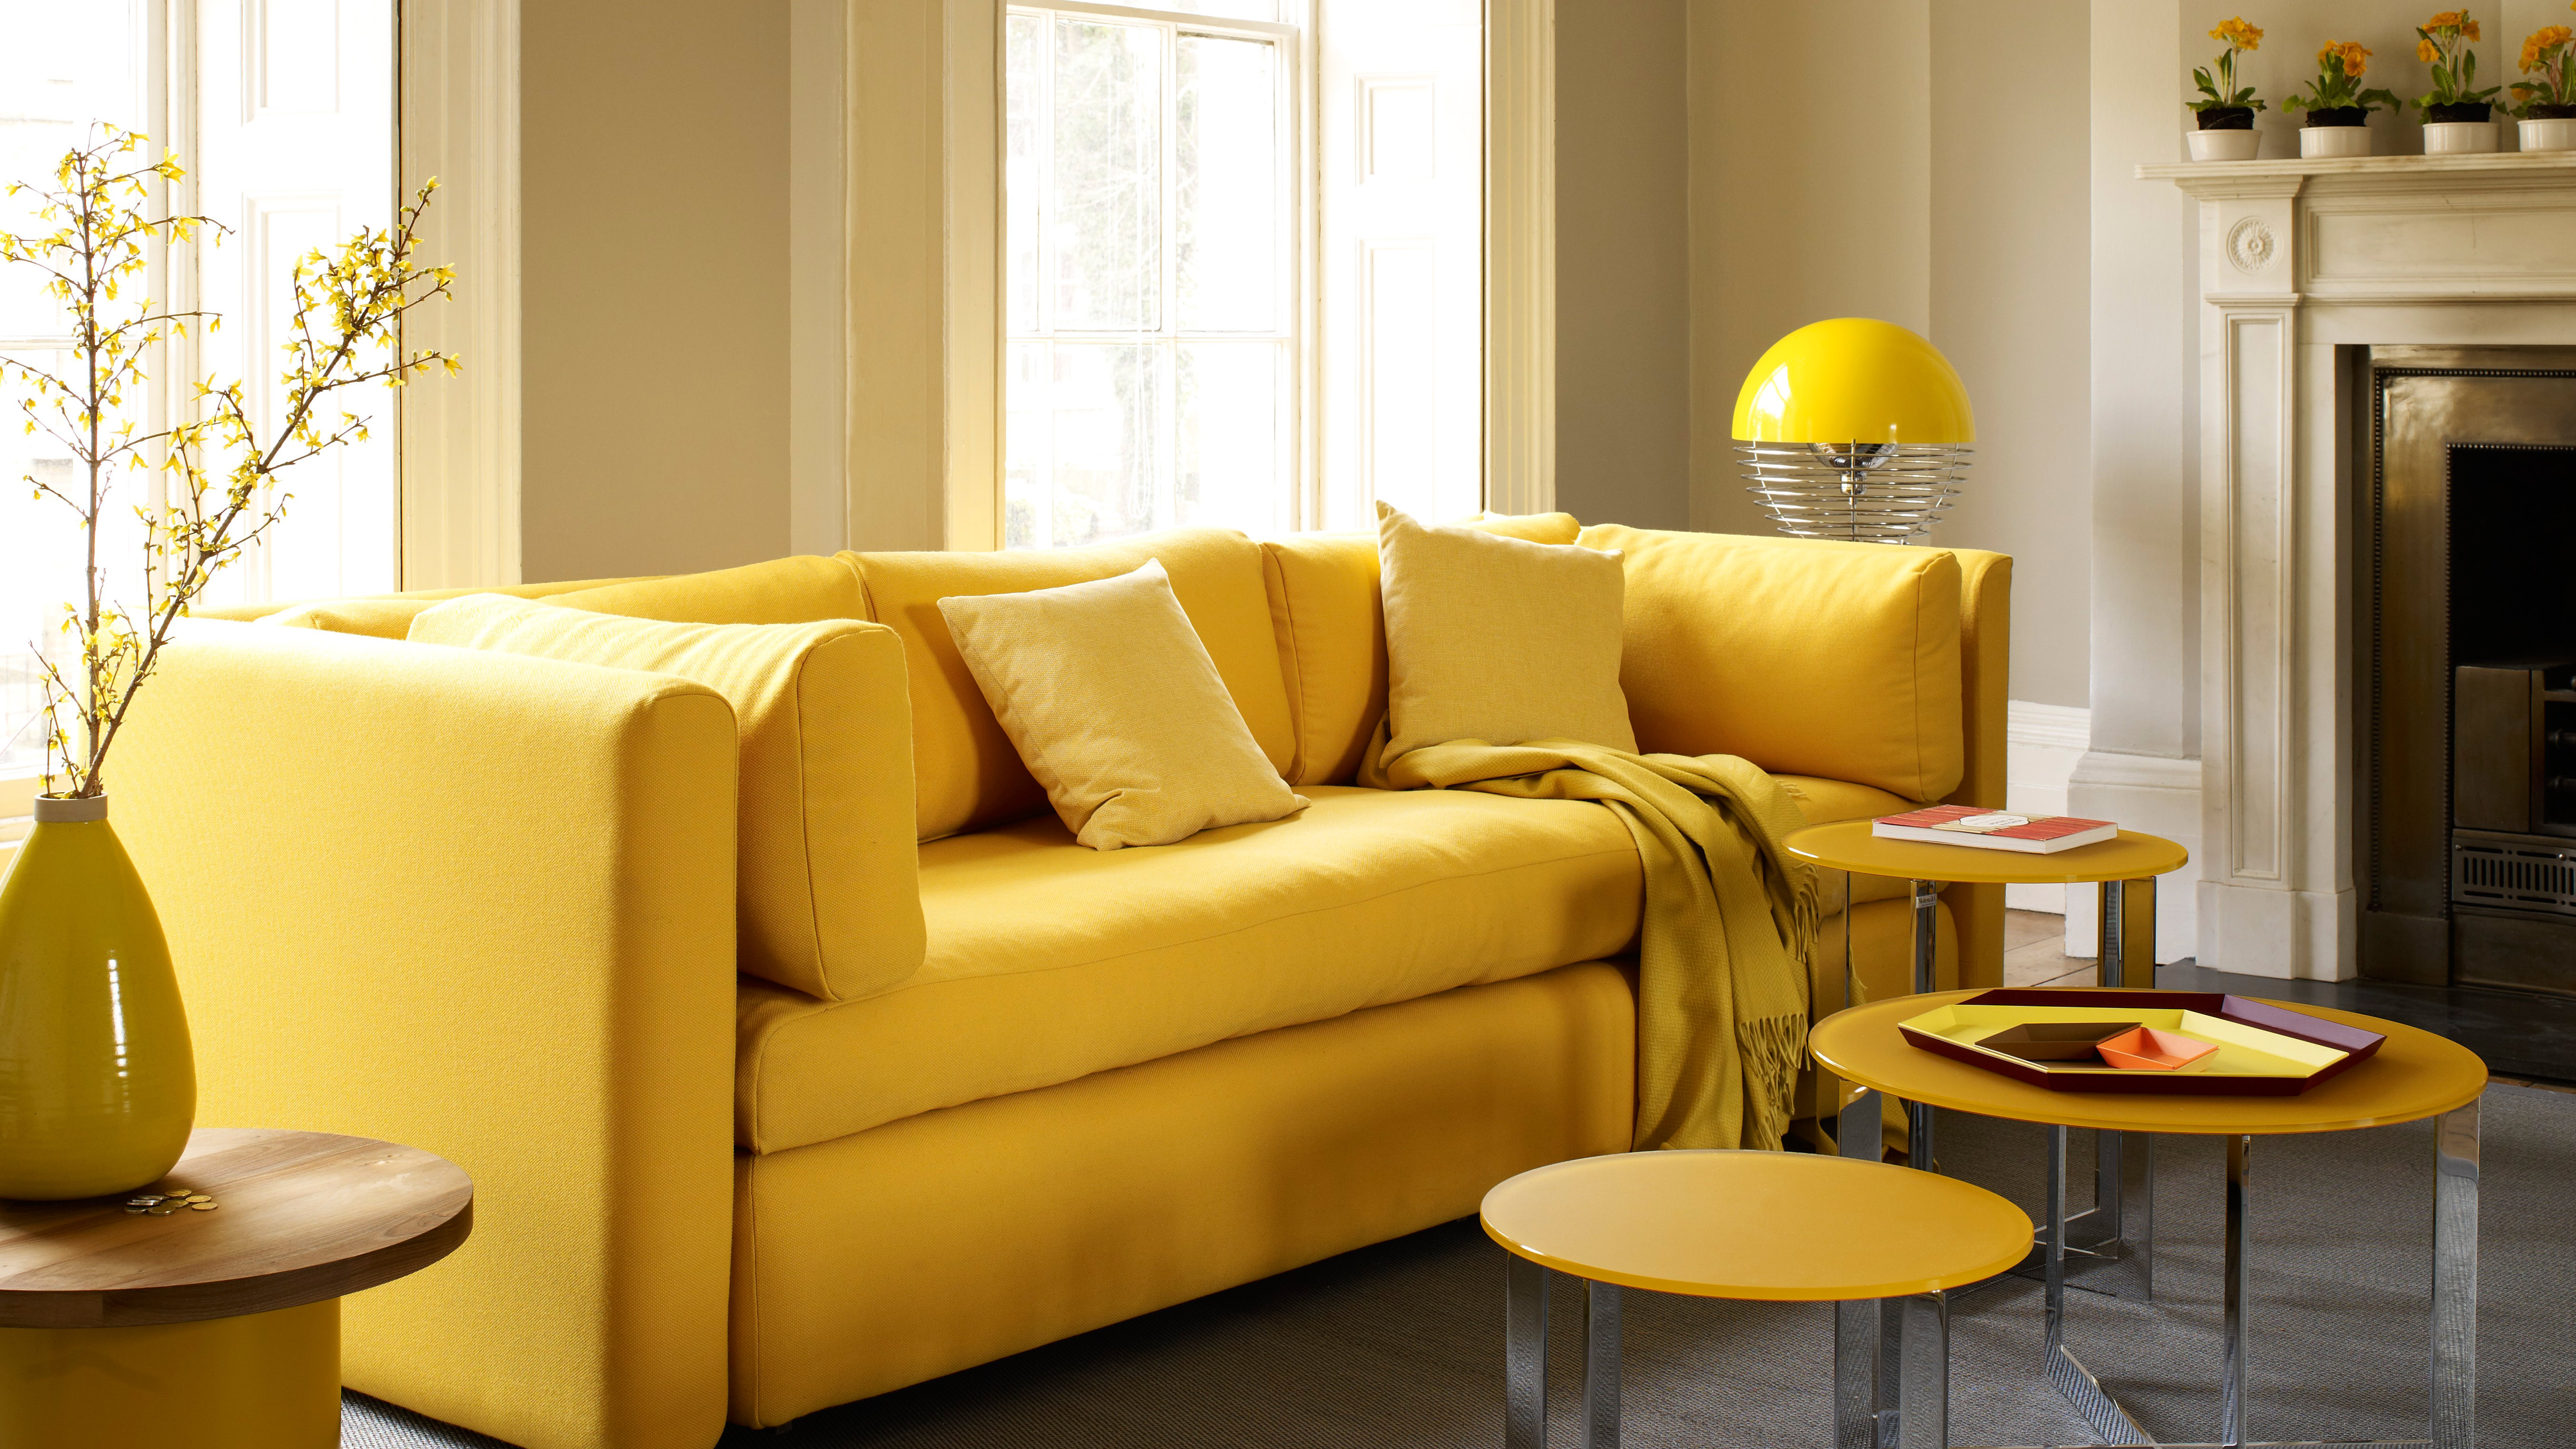 10 Yellow Living Room Ideas How To Do, Mustard Living Room Accessories The Range